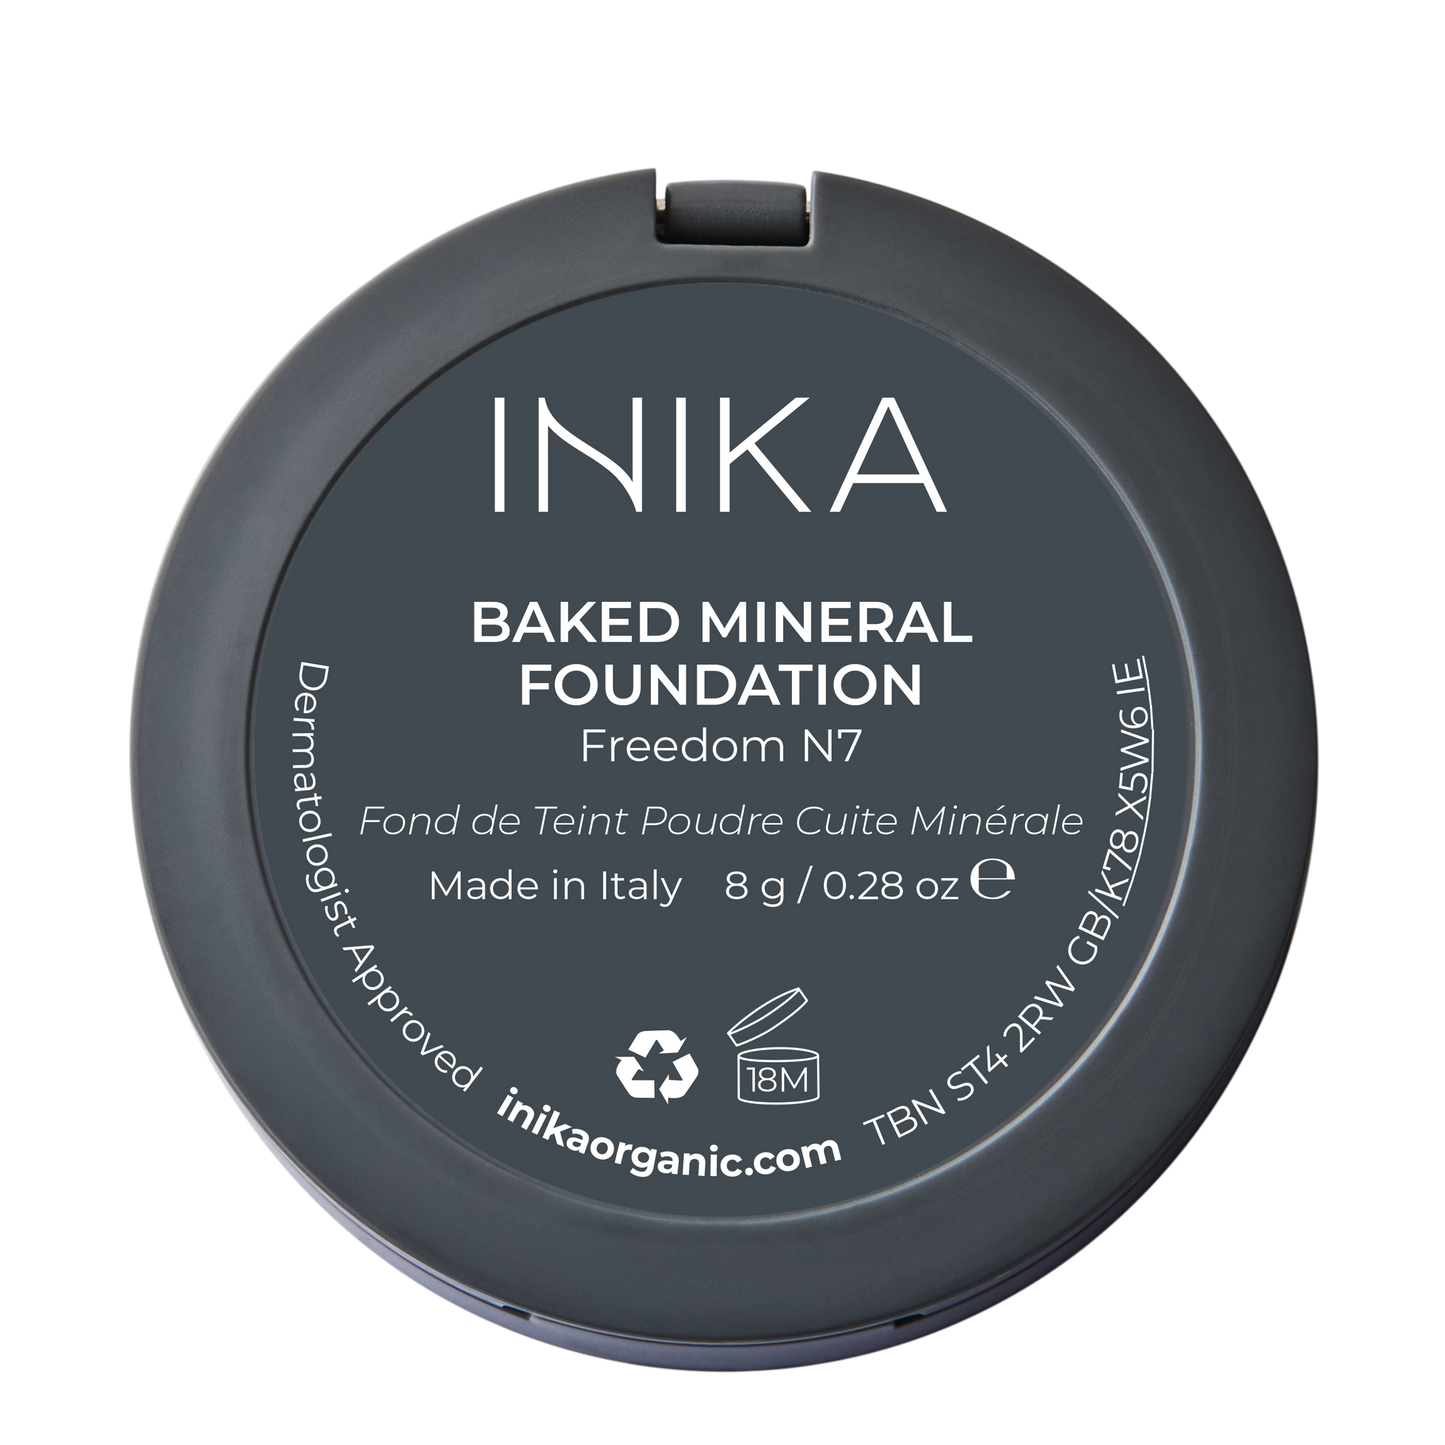 INIKA Certified Baked Mineral Foundation 8g FREEDOM